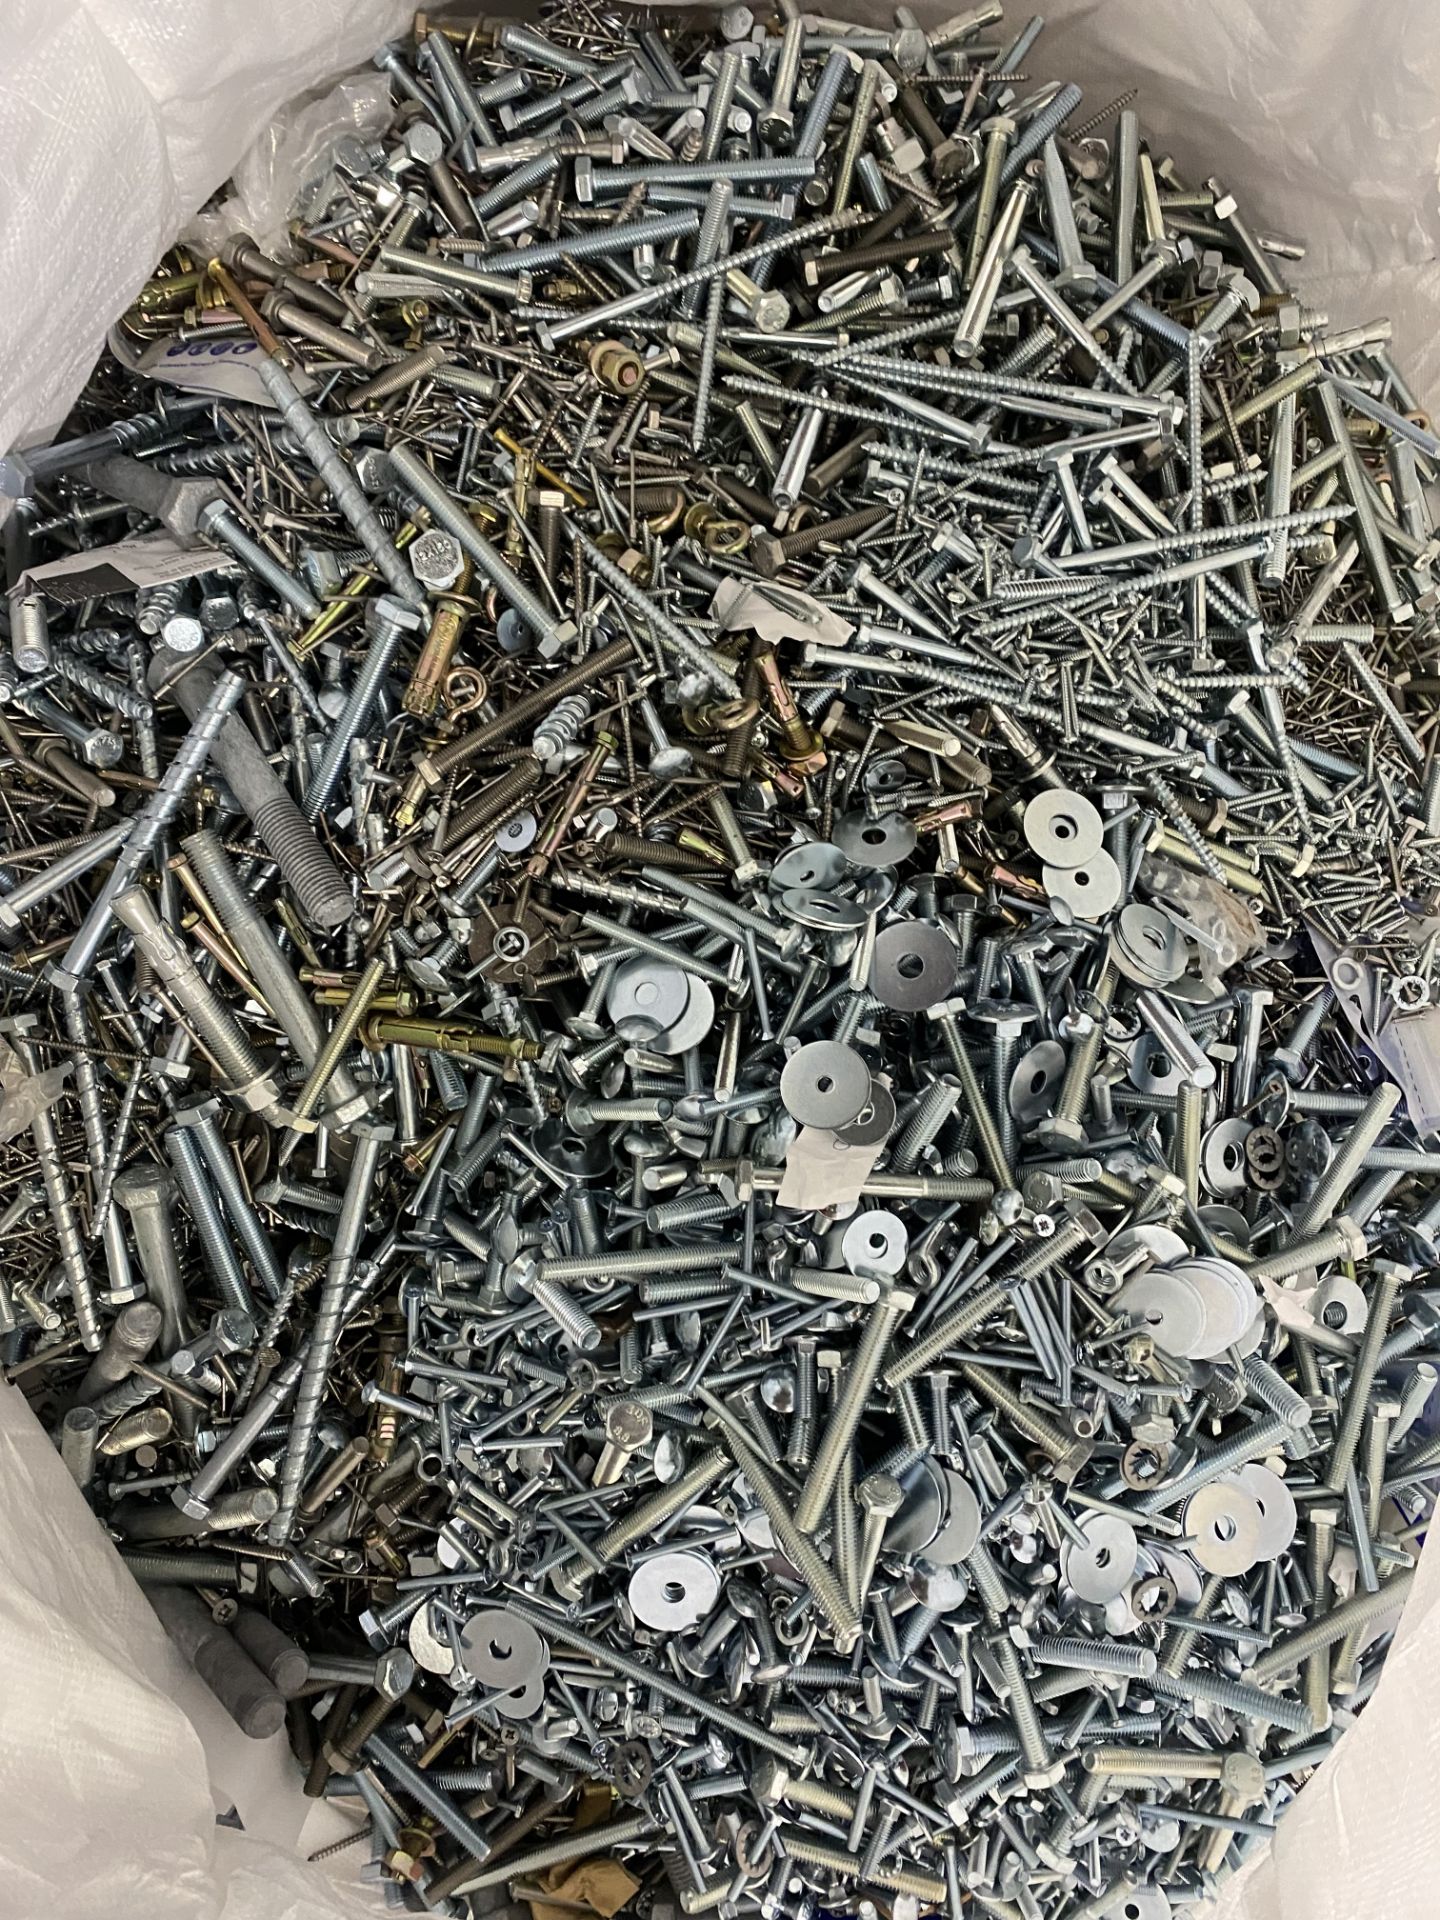 Approximately 250kg Bag Of Various loose Screws, Nuts, Bolts And Washers - Image 2 of 9